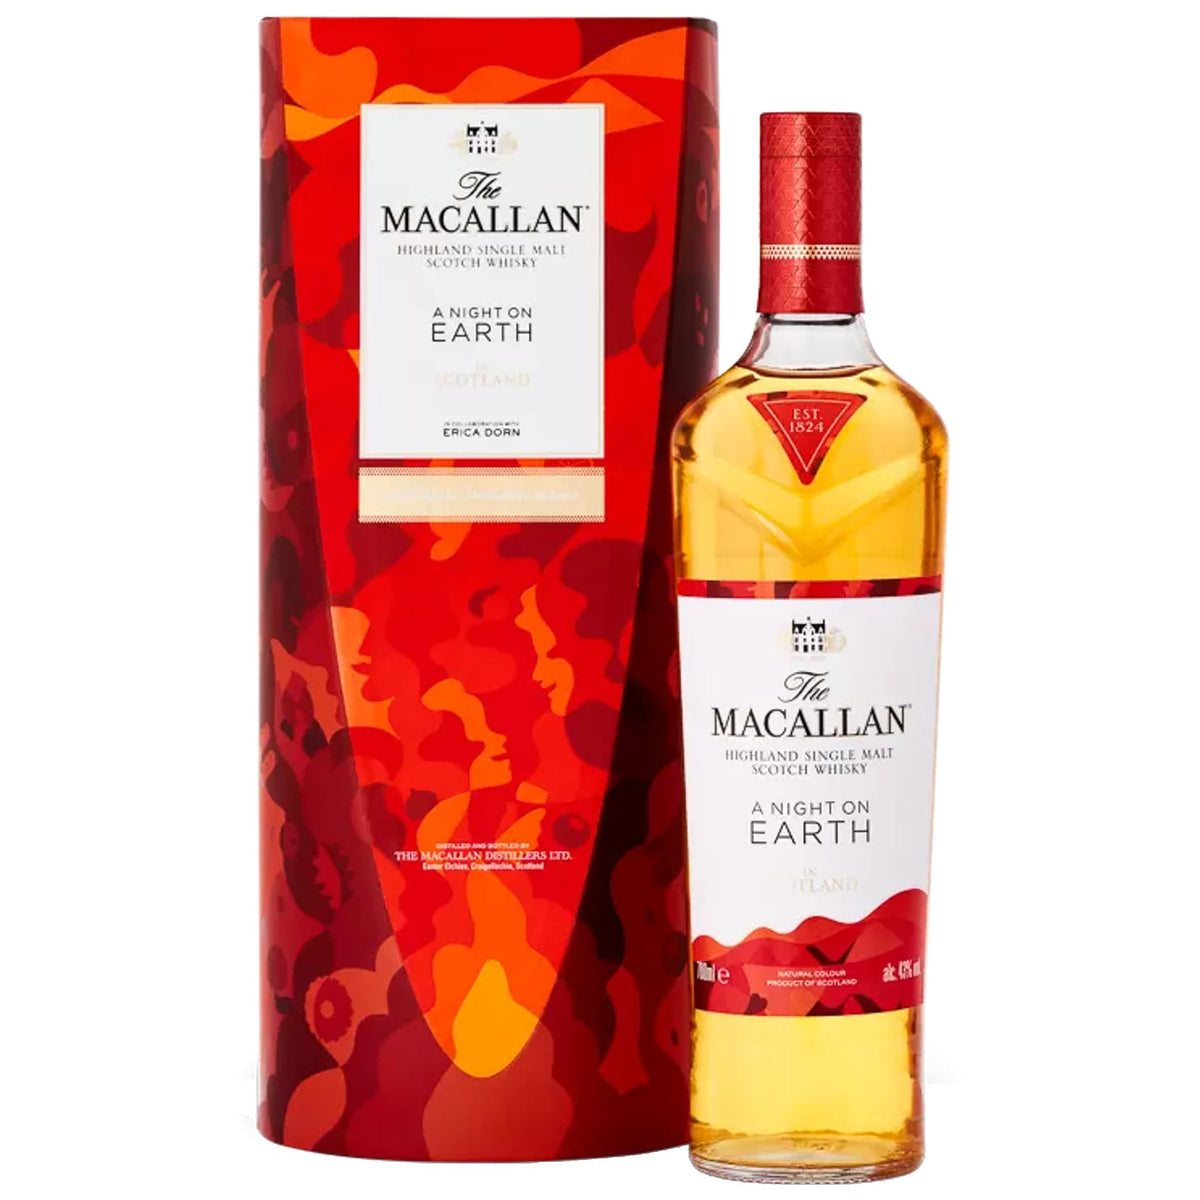 The Macallan A Night On Earth Scotch Whisky (750ml)